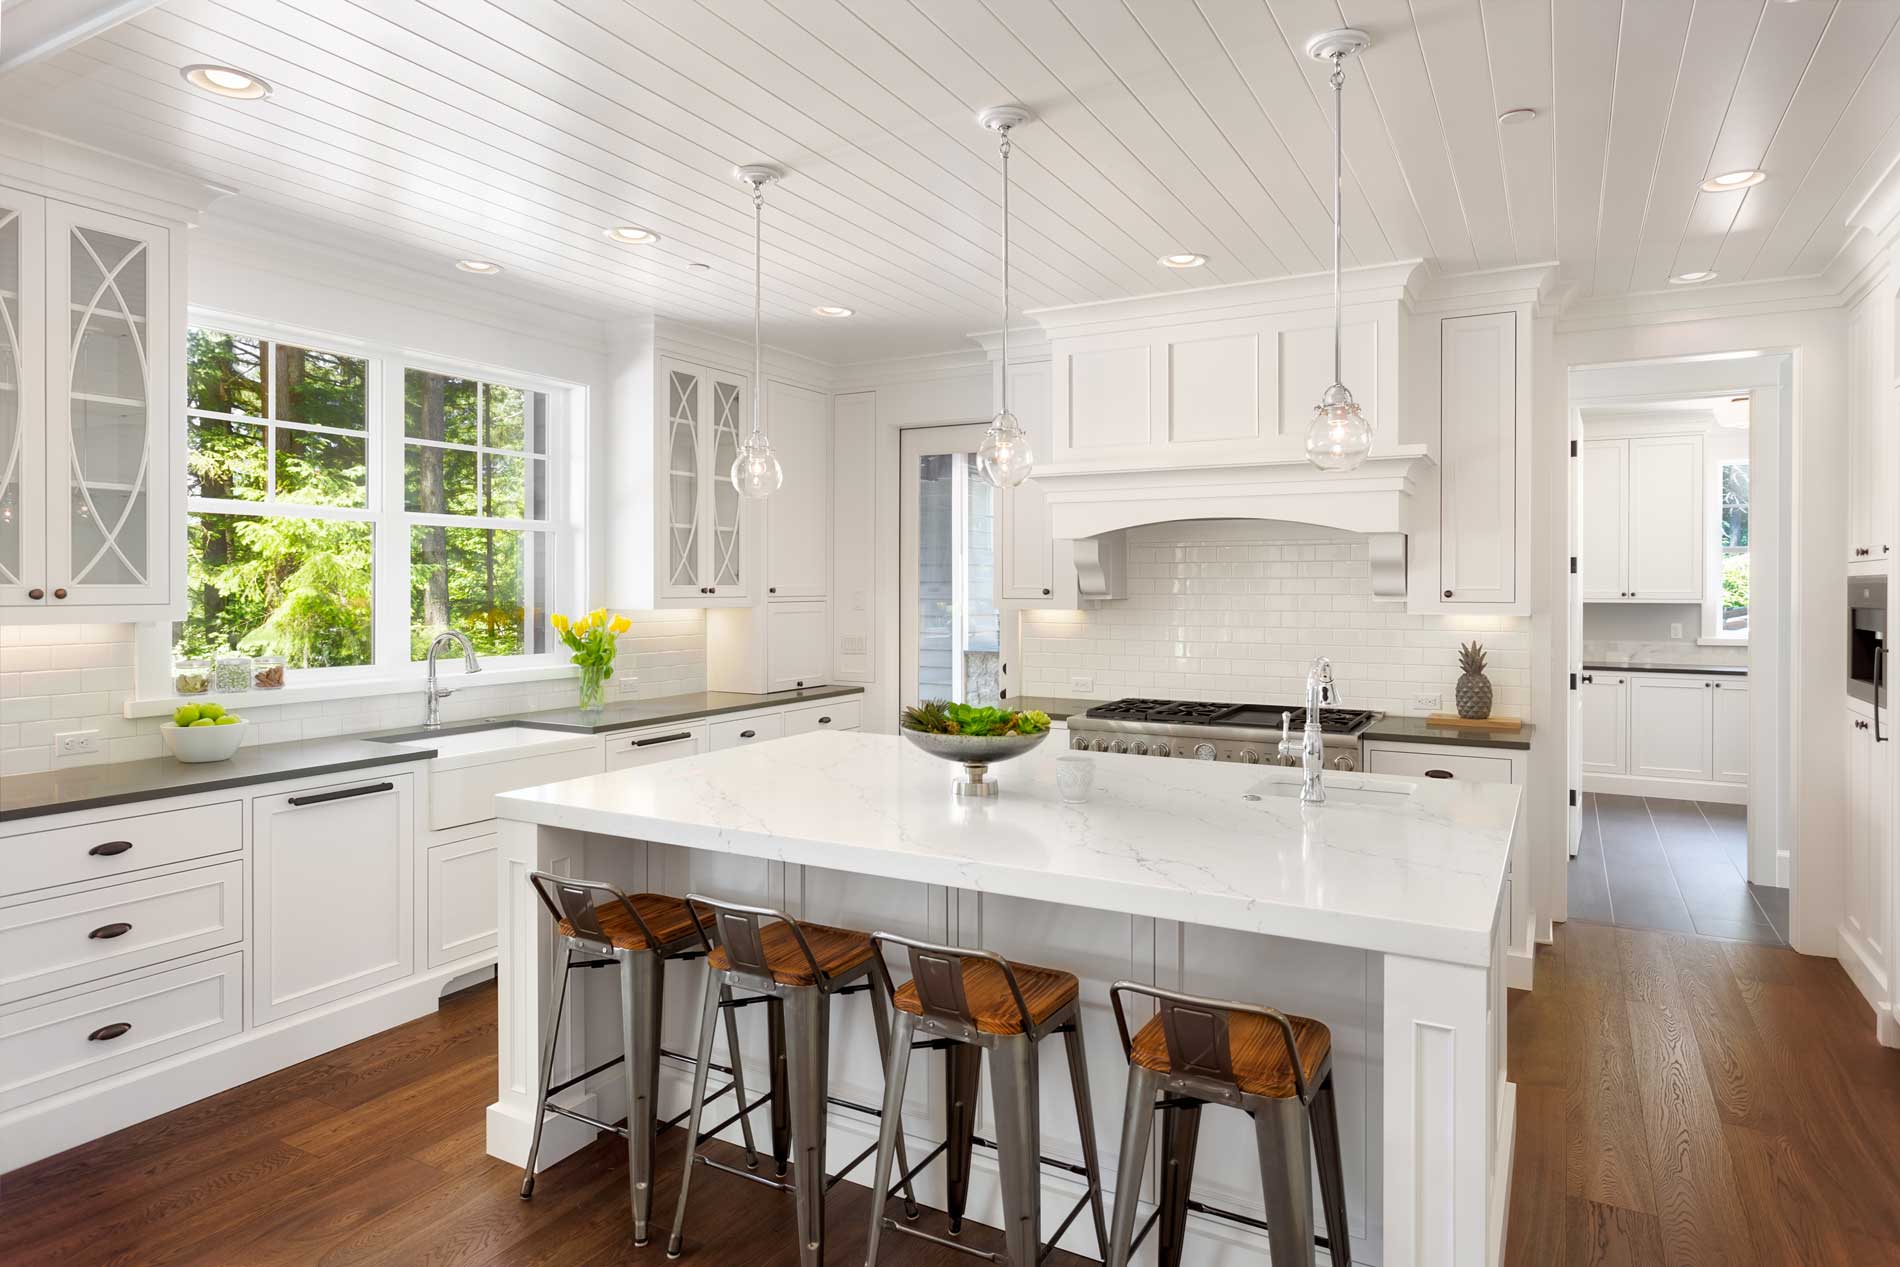 Call on Top Form Contracting in Albany OR to create the kitchen of your dreams. Whether you love to cook, entertain, or just have a beautiful space to eat with your family, your home deserves an amazing kitchen.